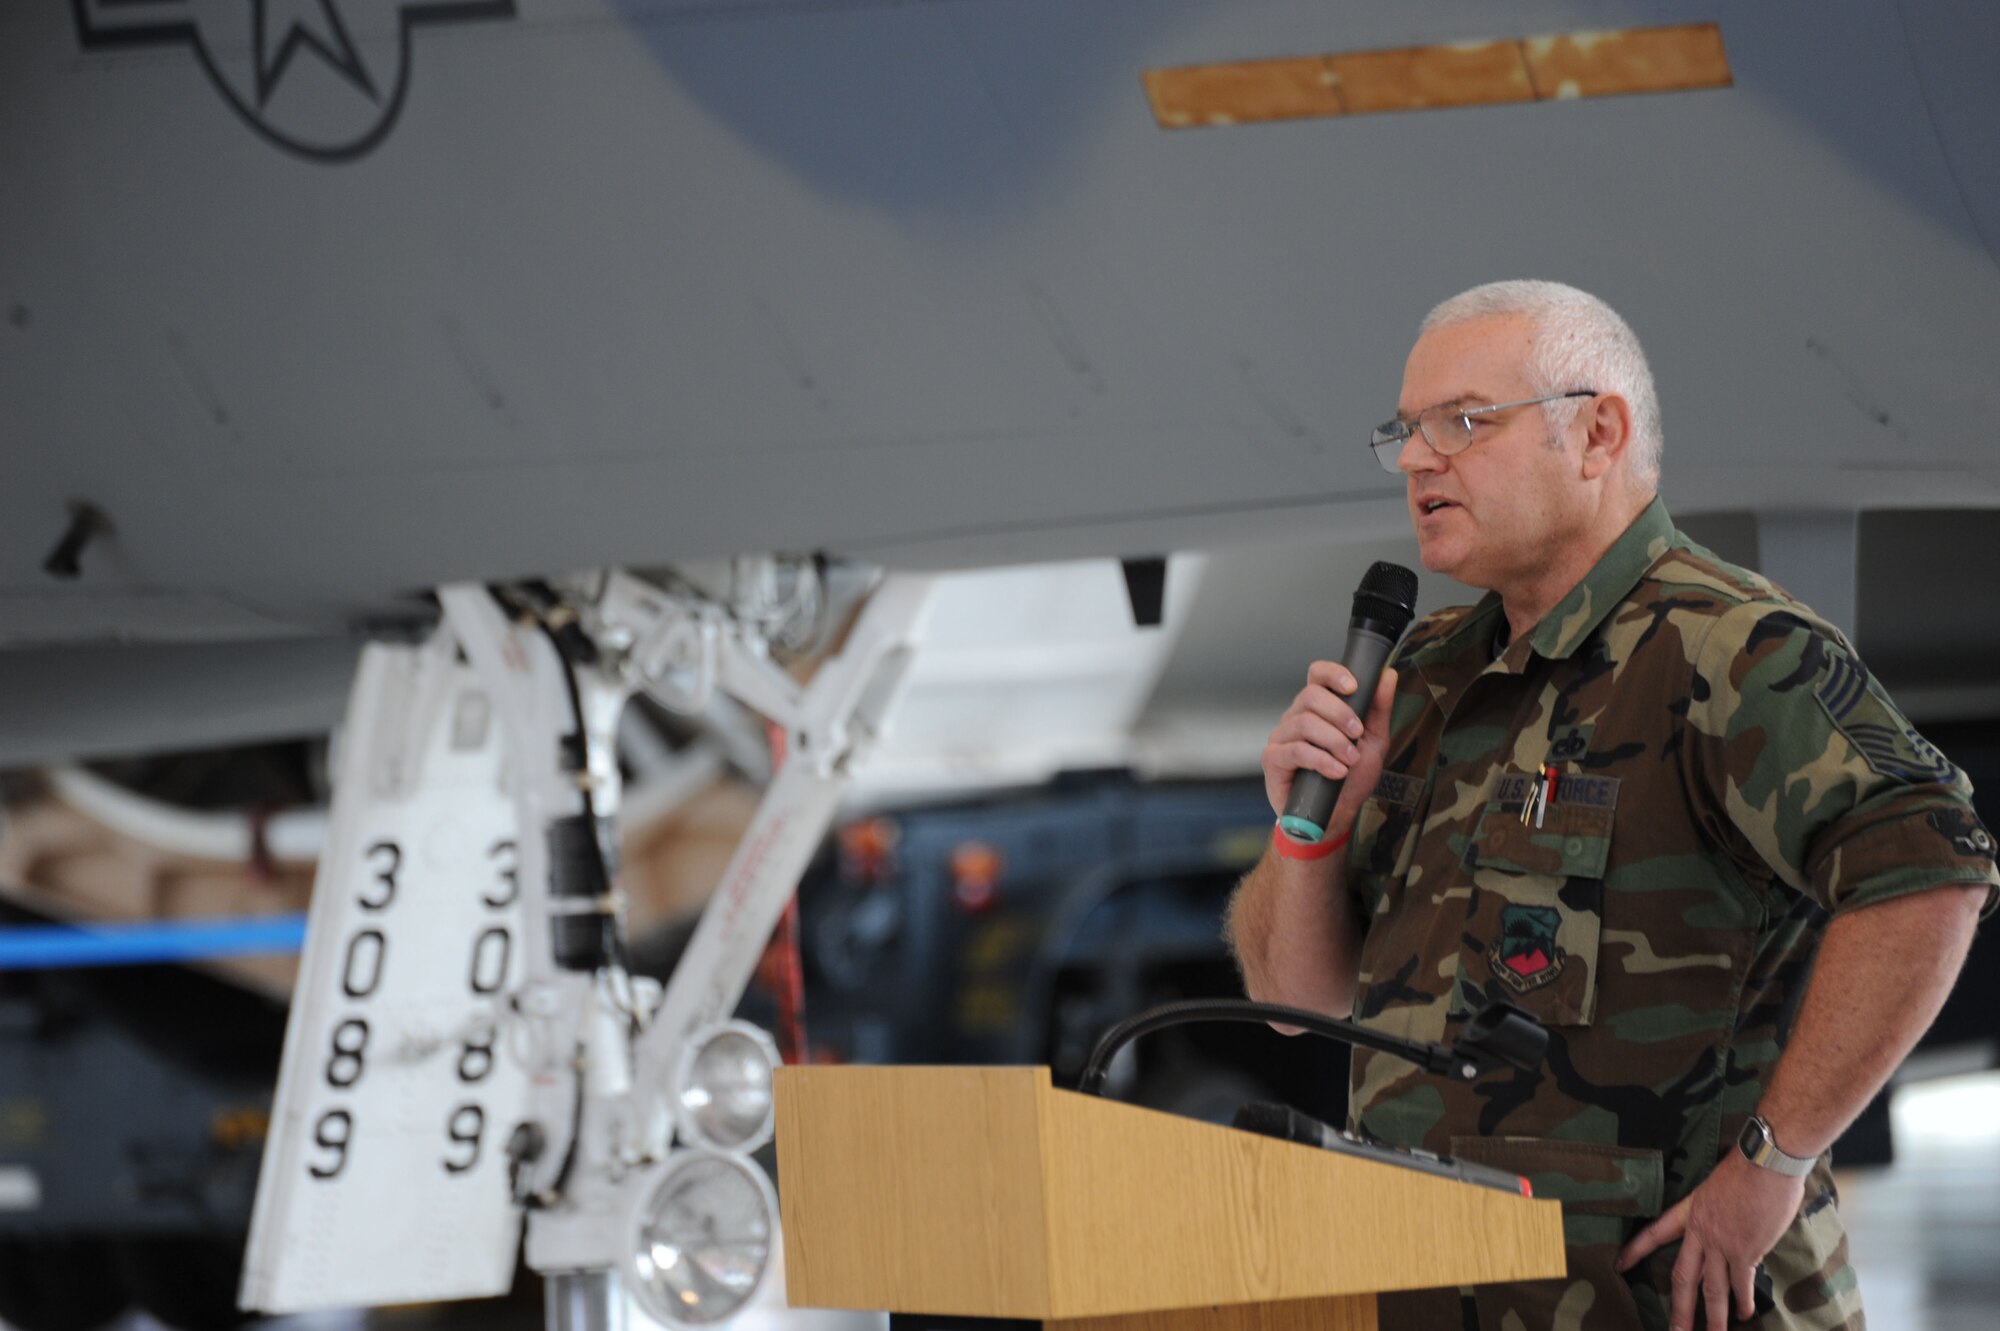 Command Chief Master Sgt. John Rasmussen spoke on the maintenance aspect of the Oregon Air Guard having one of the original production F-15A. Aircraft 73-089 was dedicated to the Evergreen Aviation Museum Nov 11, 2010. 73-089 was the oldest flying F-15 Eagle retiring at thirty six years of service. One of the first production aircraft, 089 had a uniqueness that both the maintenance and pilots loved. (US Air Force Photograph by Tech. Sgt. Greg Neuleib)